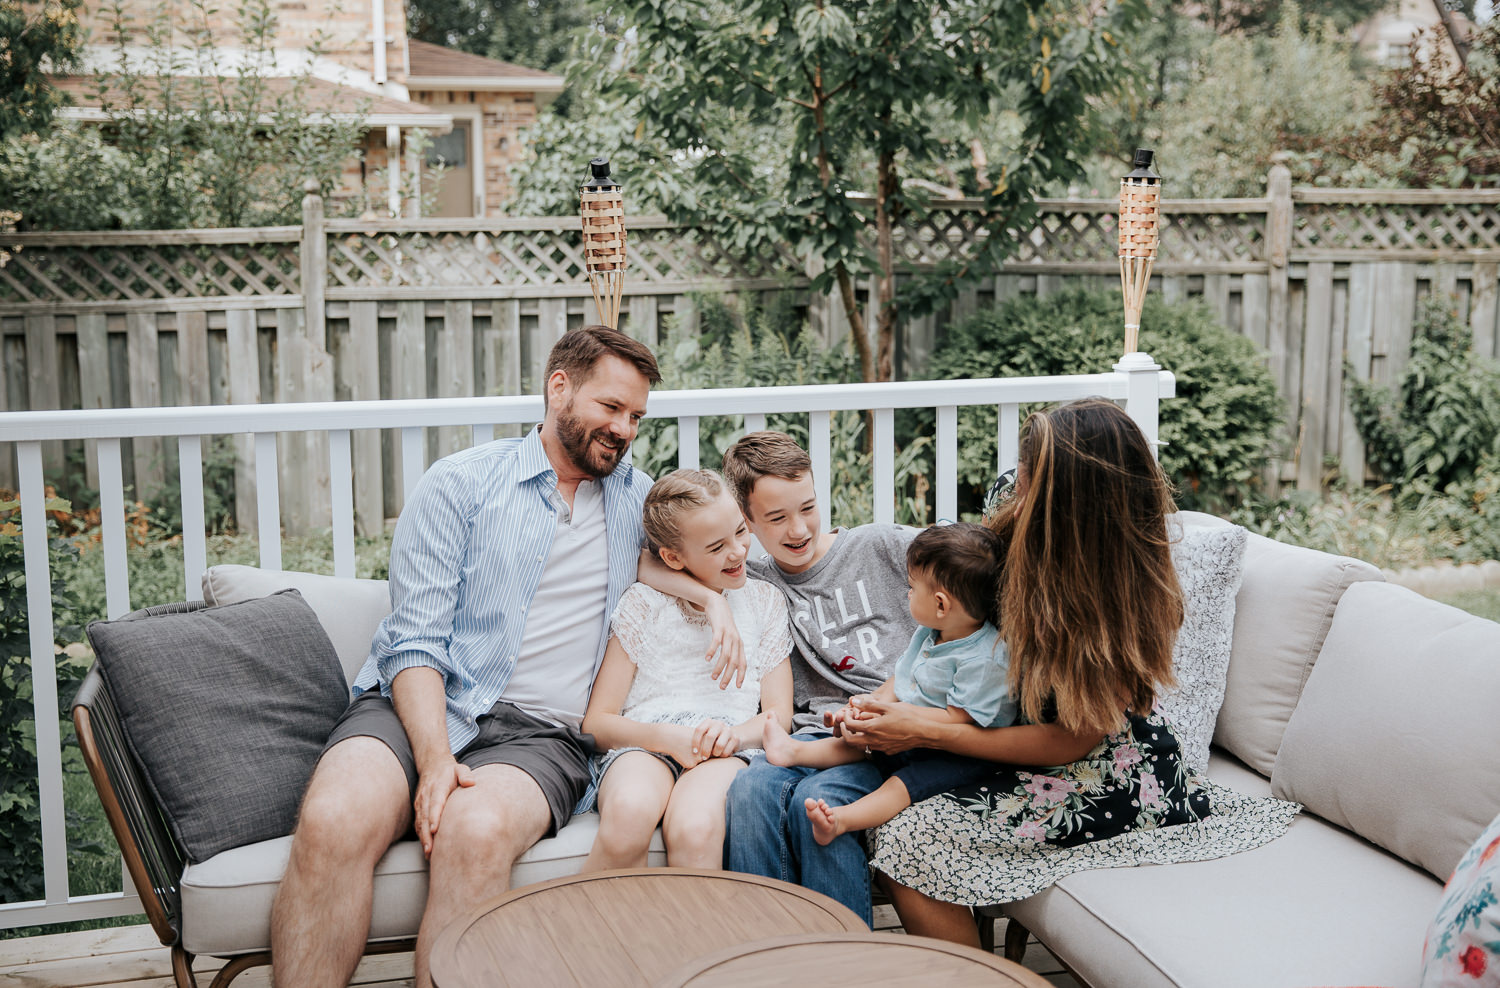 family of 5 sitting on couch on backyard deck, 11 year old girl, 13 year old boy and 1 year old baby sitting between parents, everyone looking at each other laughing - Barrie Lifestyle Photography